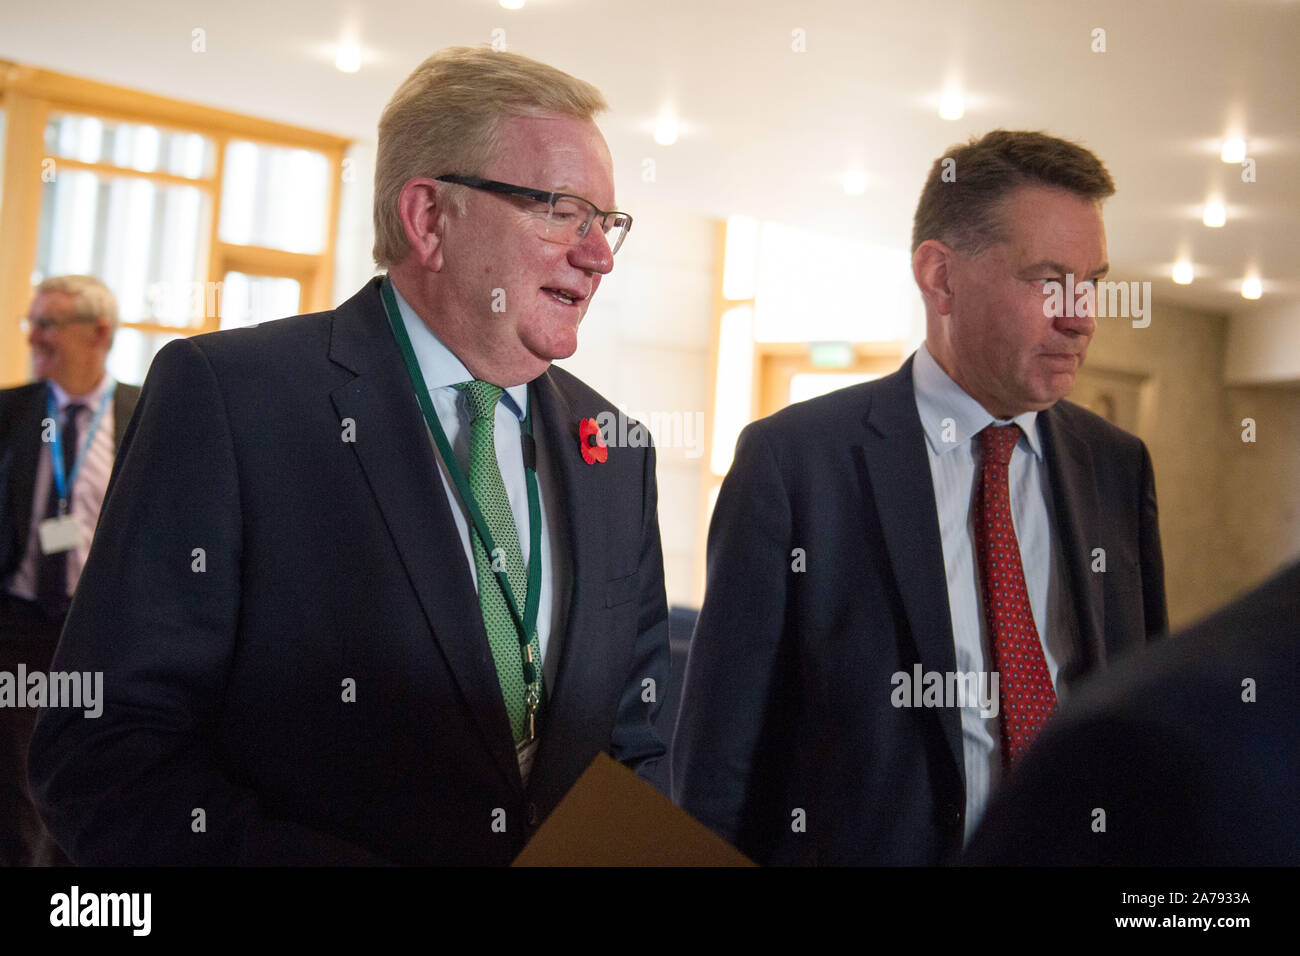 Edinburgh, UK. 31st Oct, 2019. Edinburgh, 31 October 2019. Pictured: (left) Jackson Carlaw MSP - Interim Leader of the Scottish Conservatives and Unionist Party; (right) Murdo Fraser MSP - Shadow Cabinet Secretary for Finance of the Scottish Conservative and Unionist Party. Weekly session of First Ministers Questions at the Scottish Parliament. Credit: Colin Fisher/Alamy Live News Stock Photo